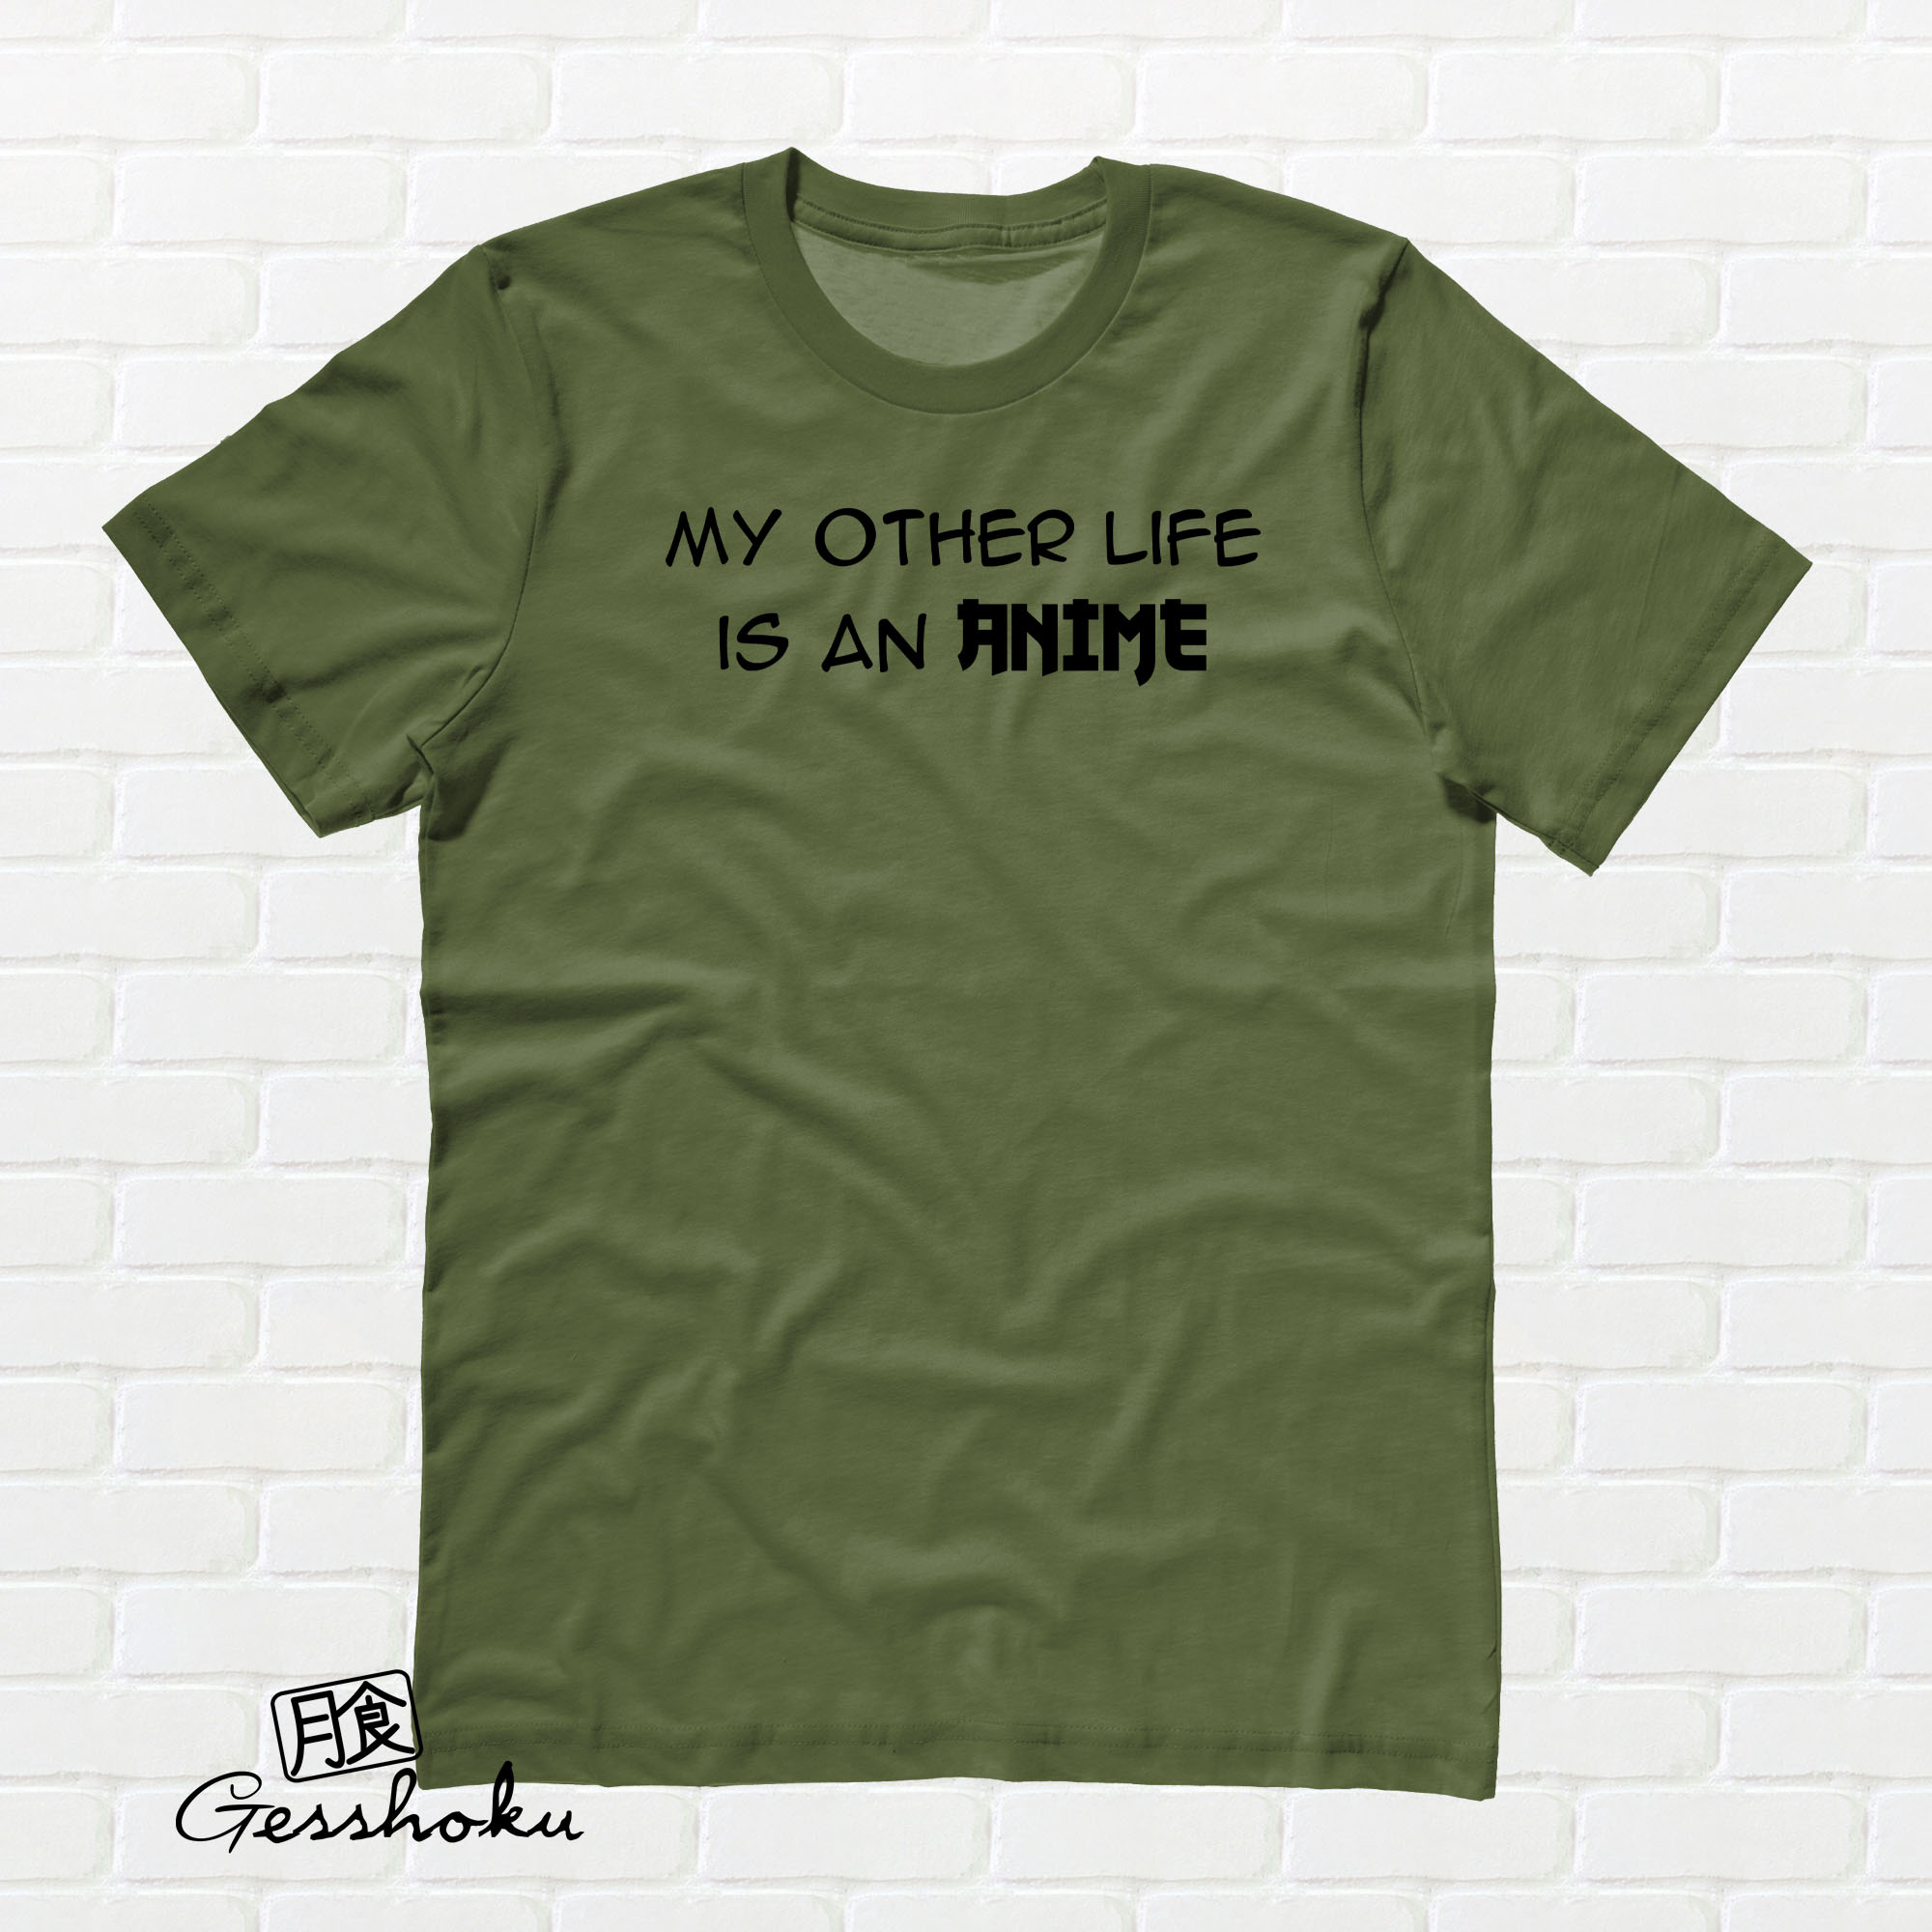 My Other Life is an Anime T-shirt - Olive Green